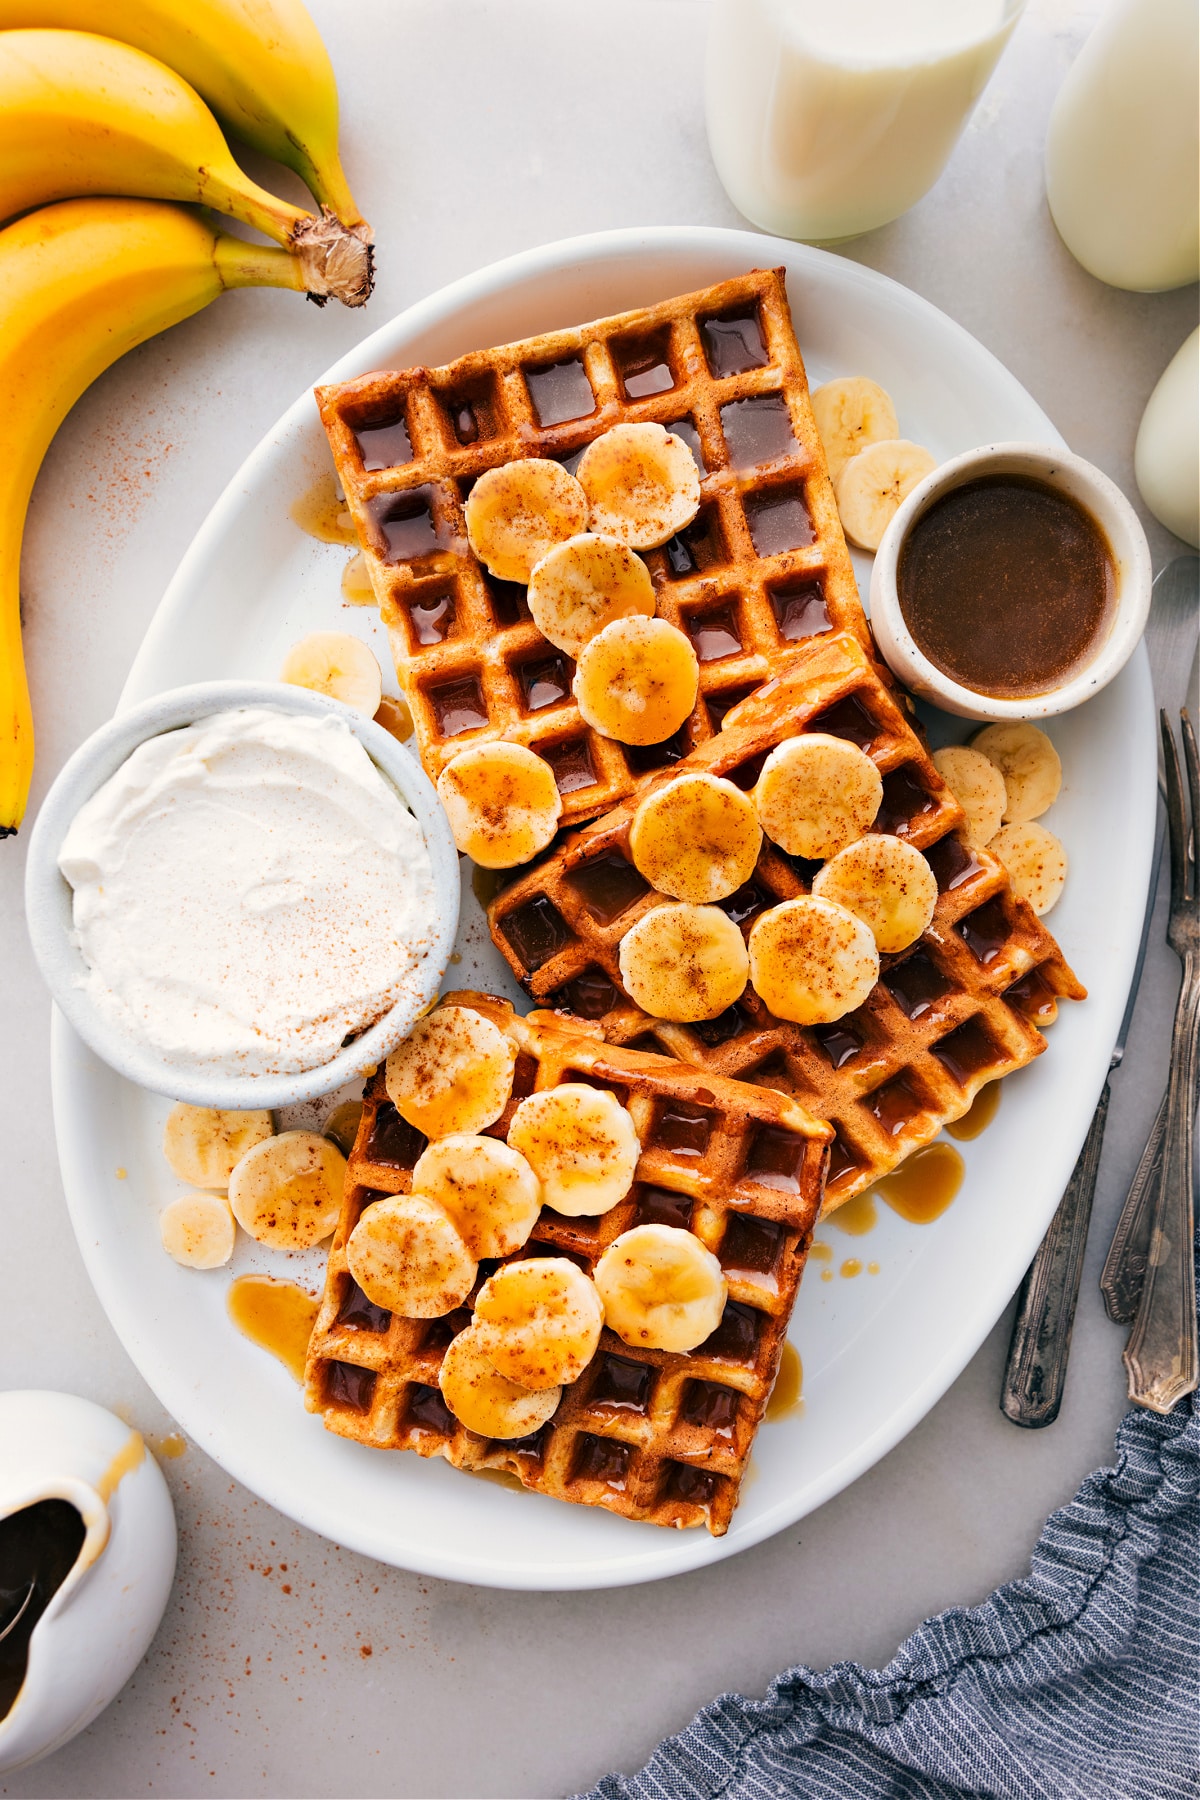 Banana Waffles on a platter with syrup drizzled over them.